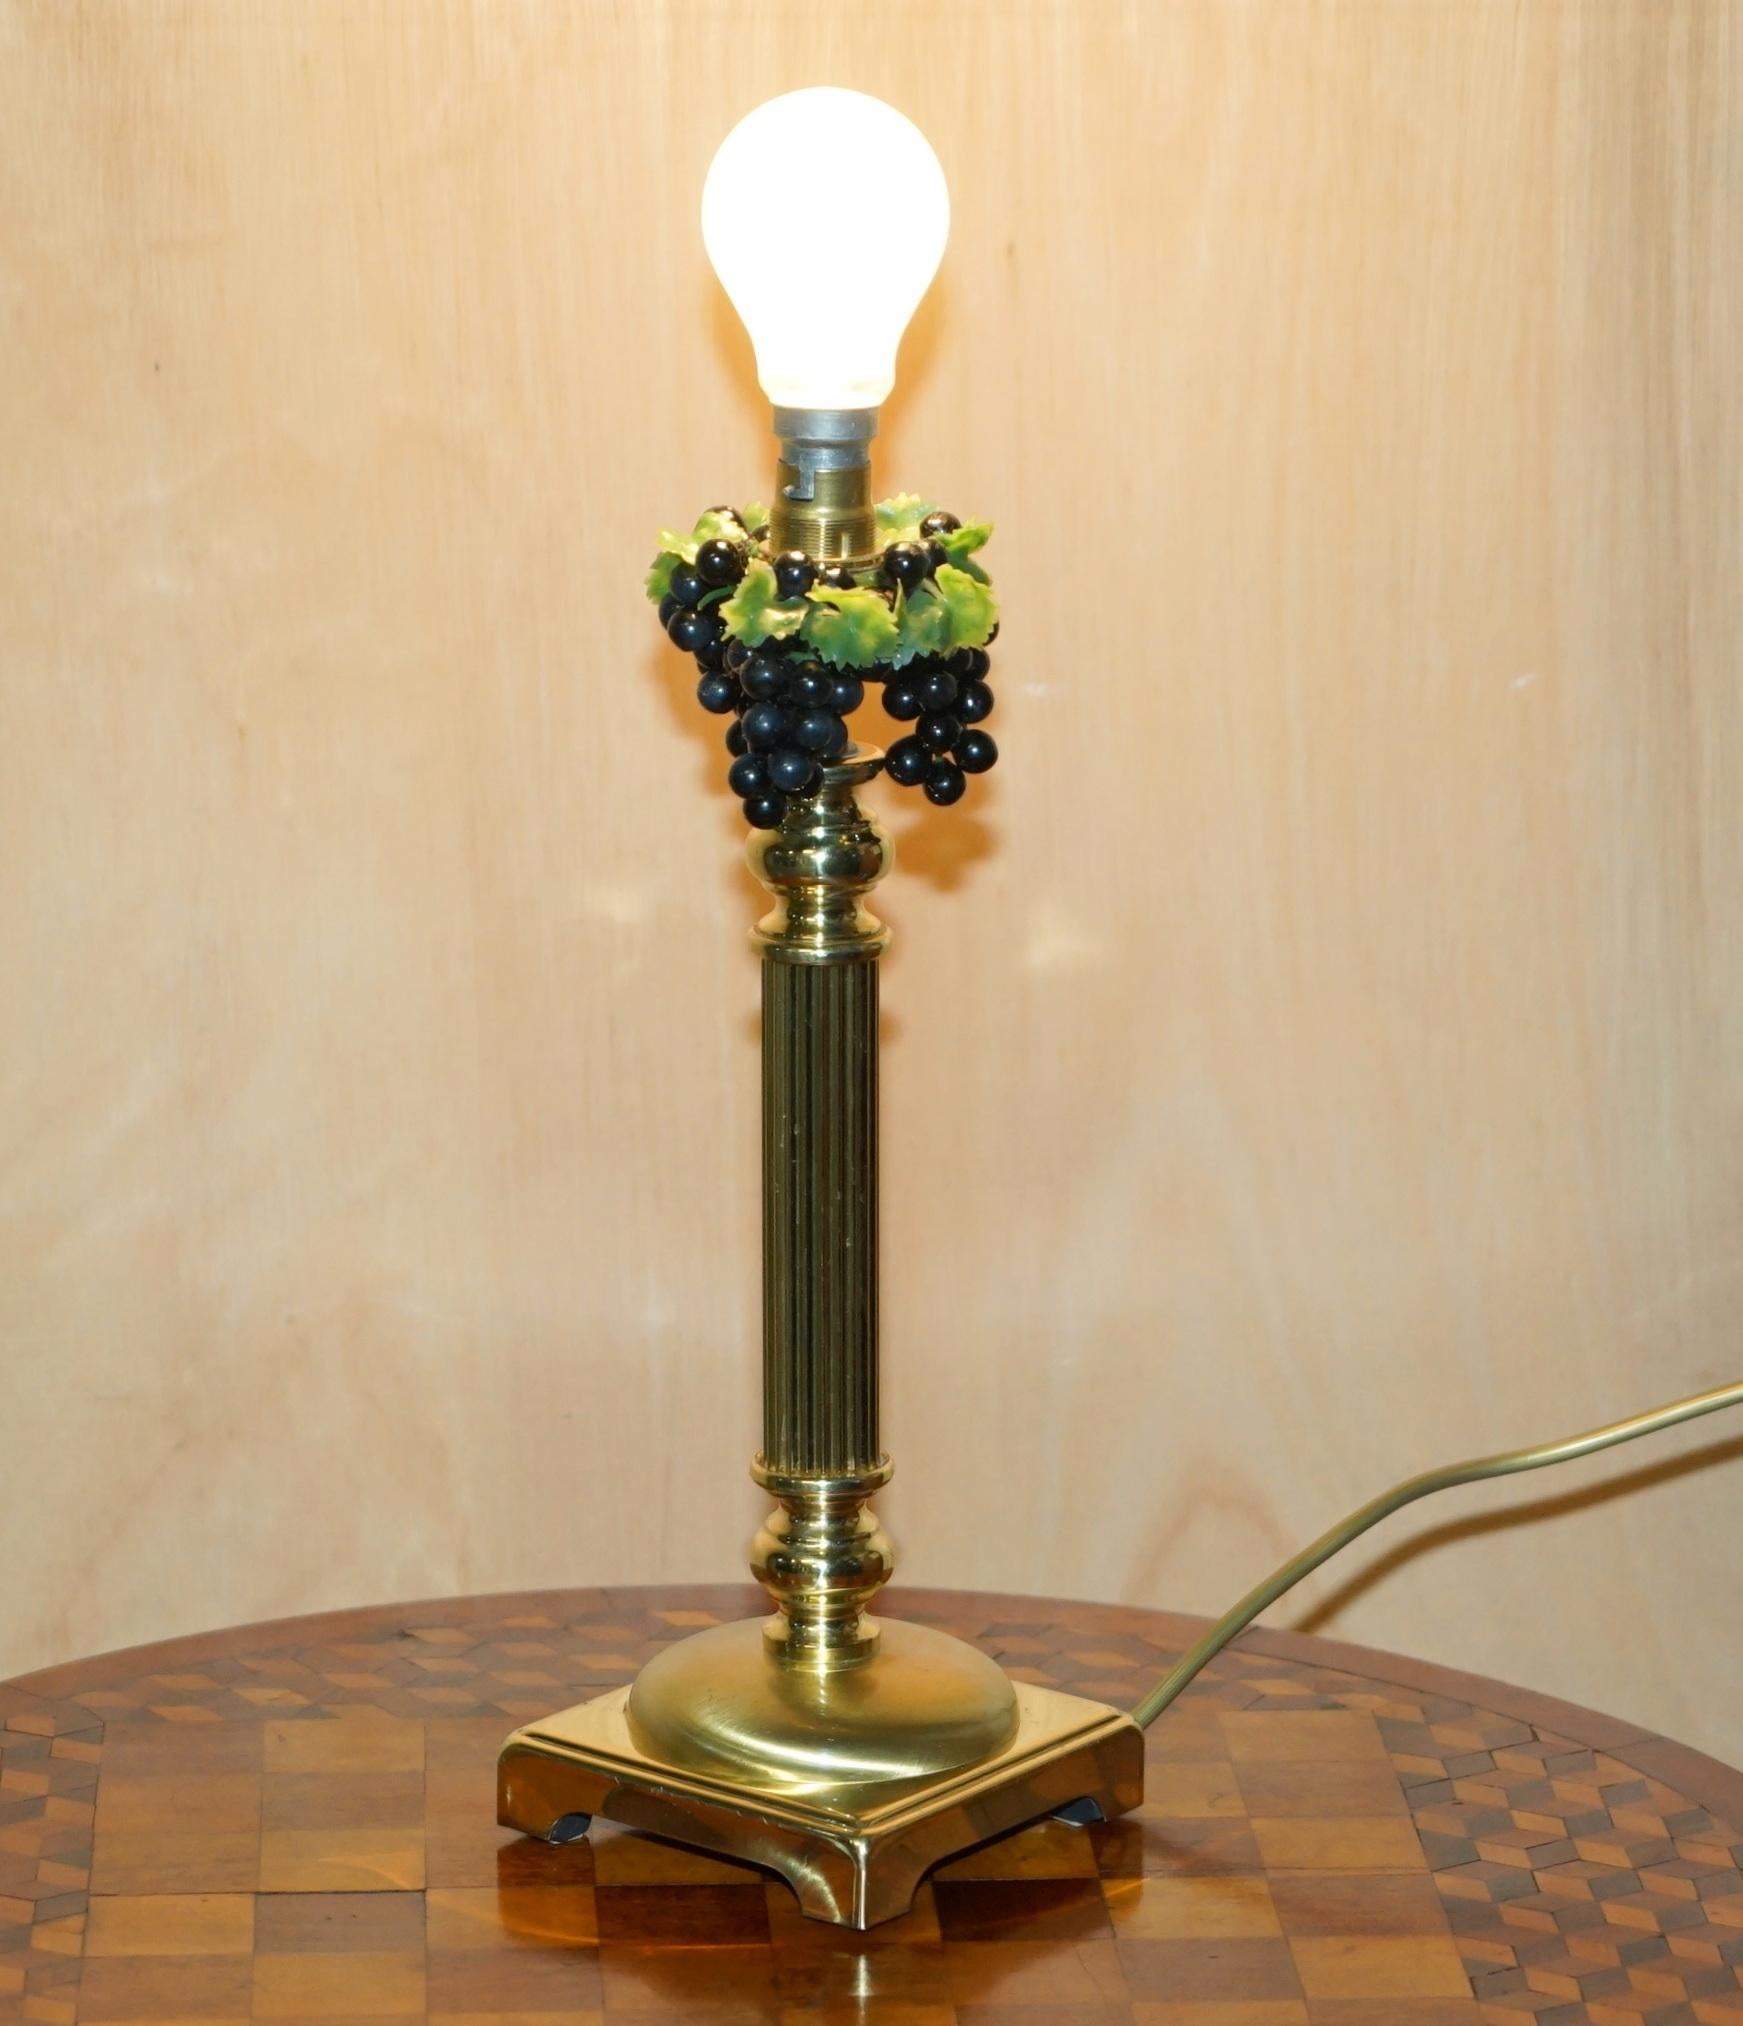 Royal House Antiques

Royal House Antiques is delighted to offer for sale this stunning pair of vintage Corinthian Pillar table lamps with Grape Vine decoration 

Please note the delivery fee listed is just a guide, it covers within the M25 only for